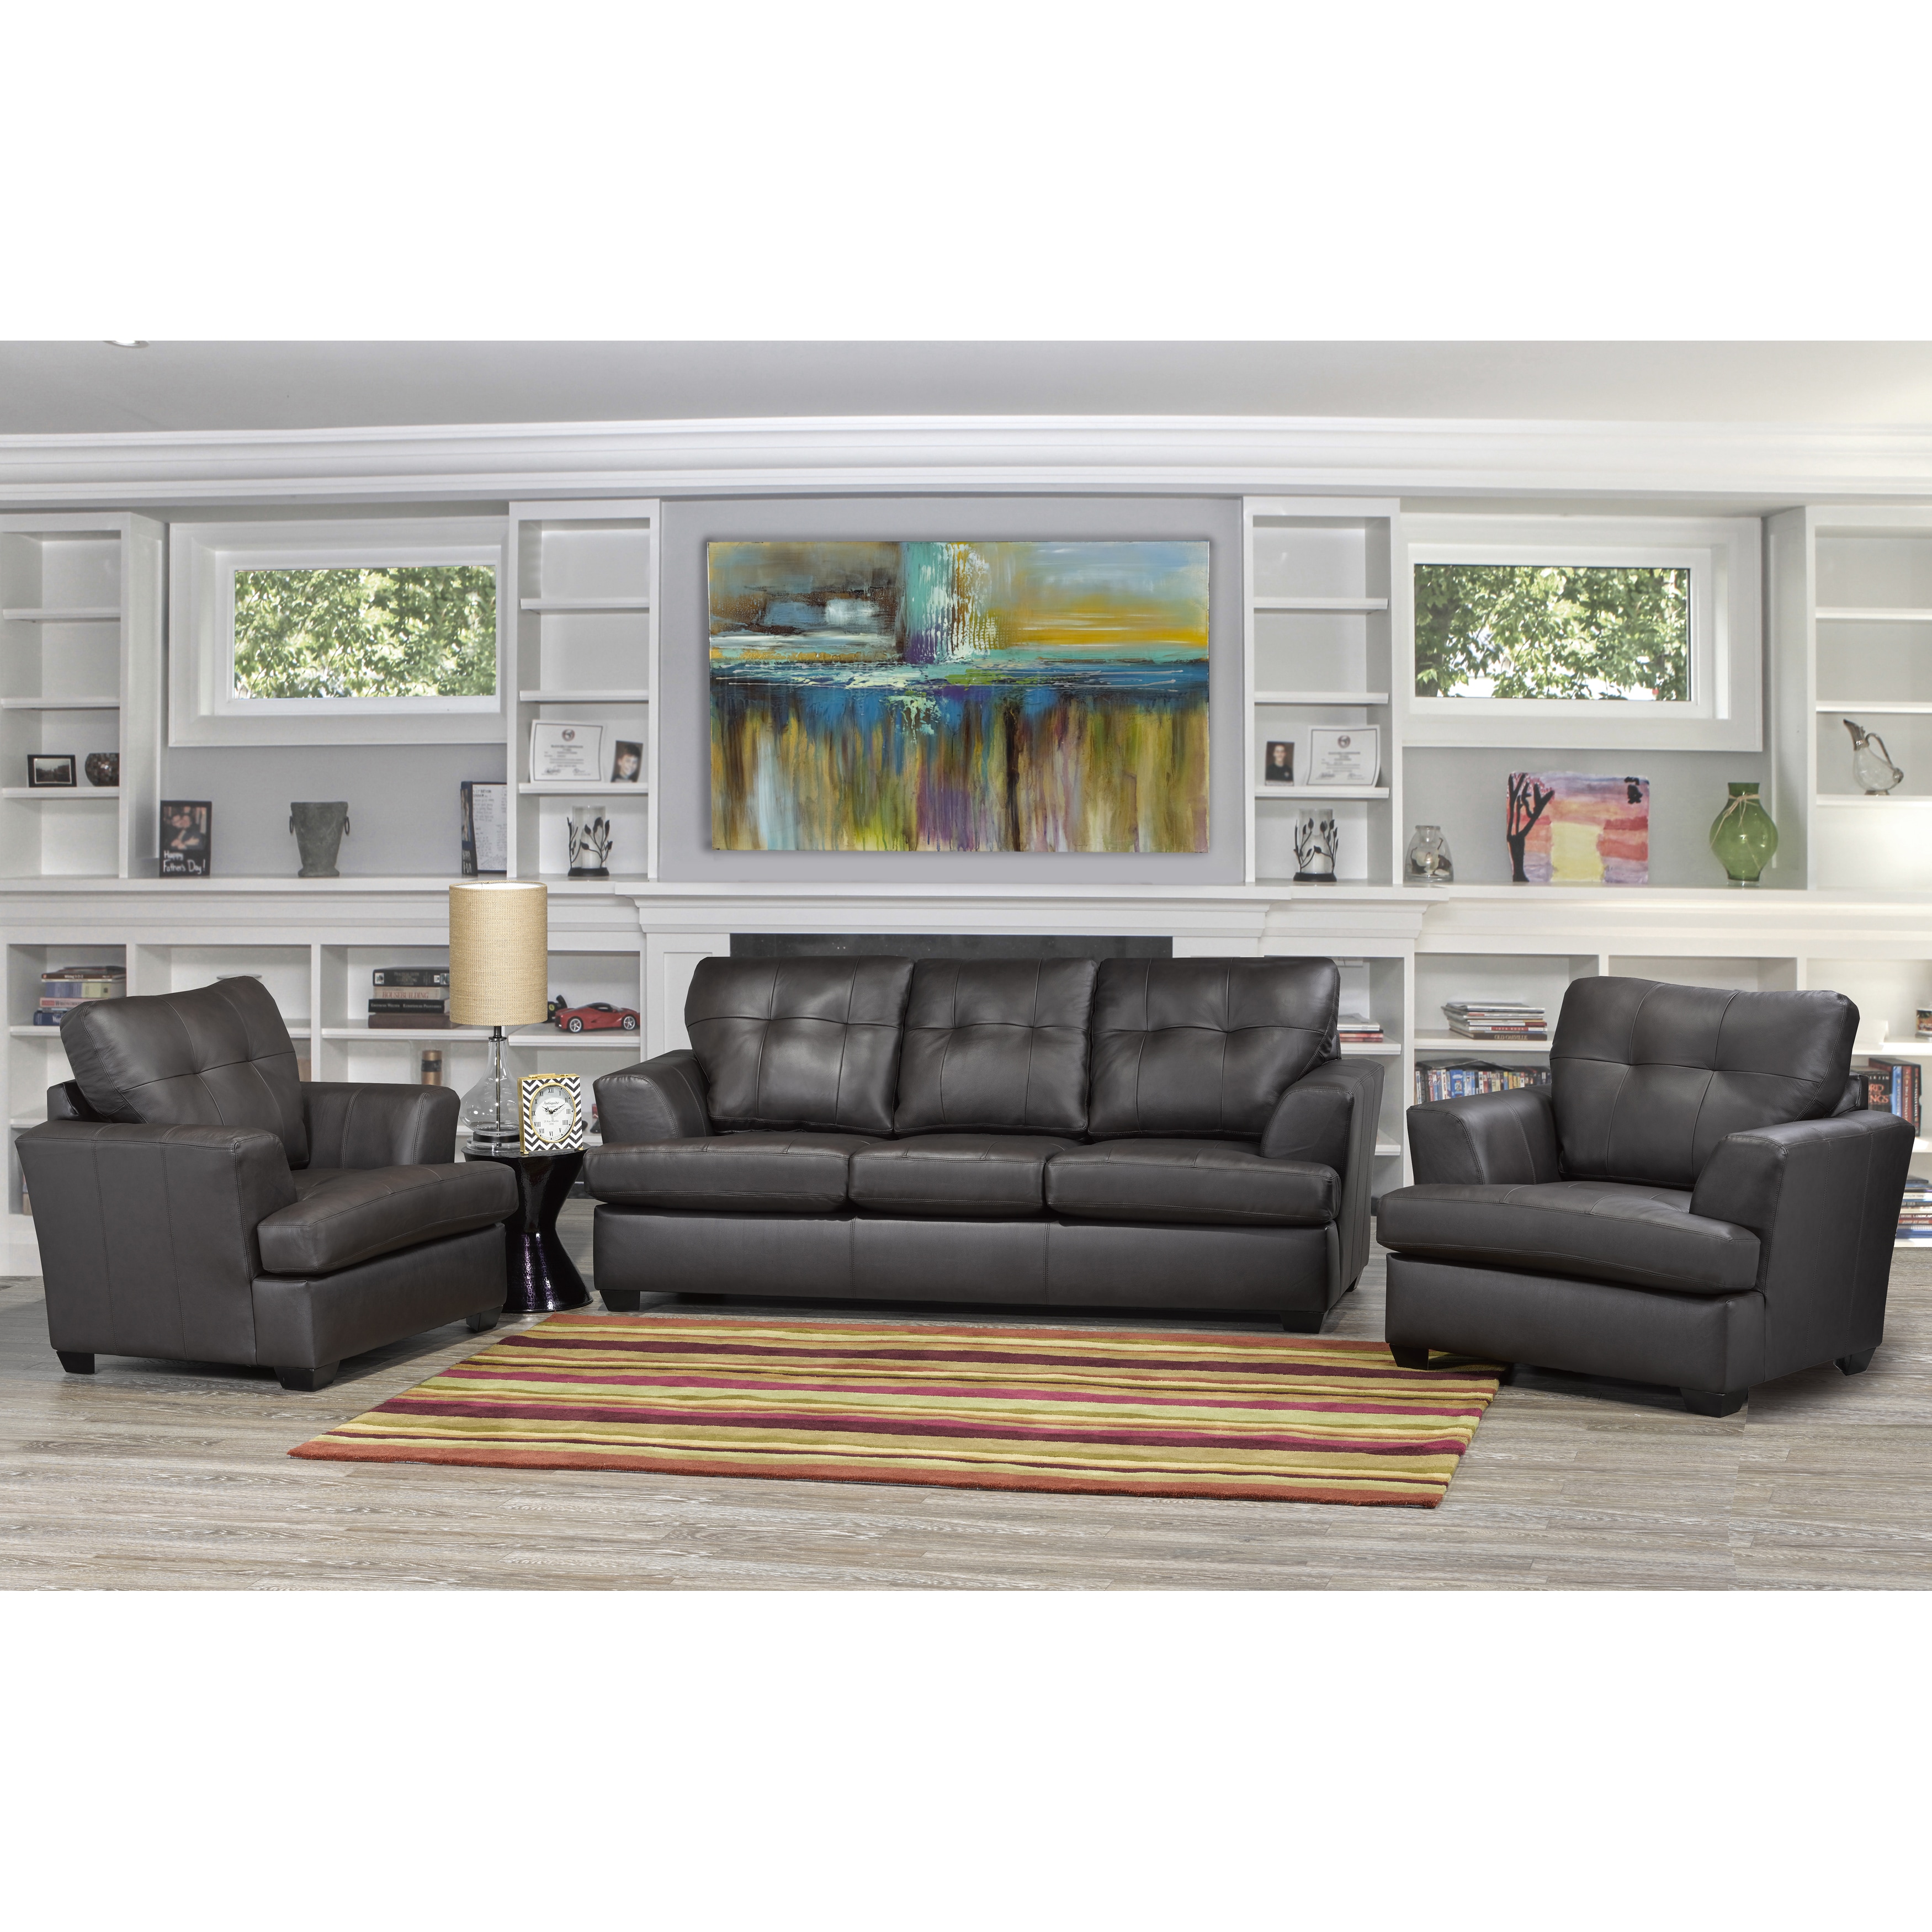 Carrera Premium Brown Top Grain Leather Sofa And Two Chairs Set On Sale Overstock 13251185